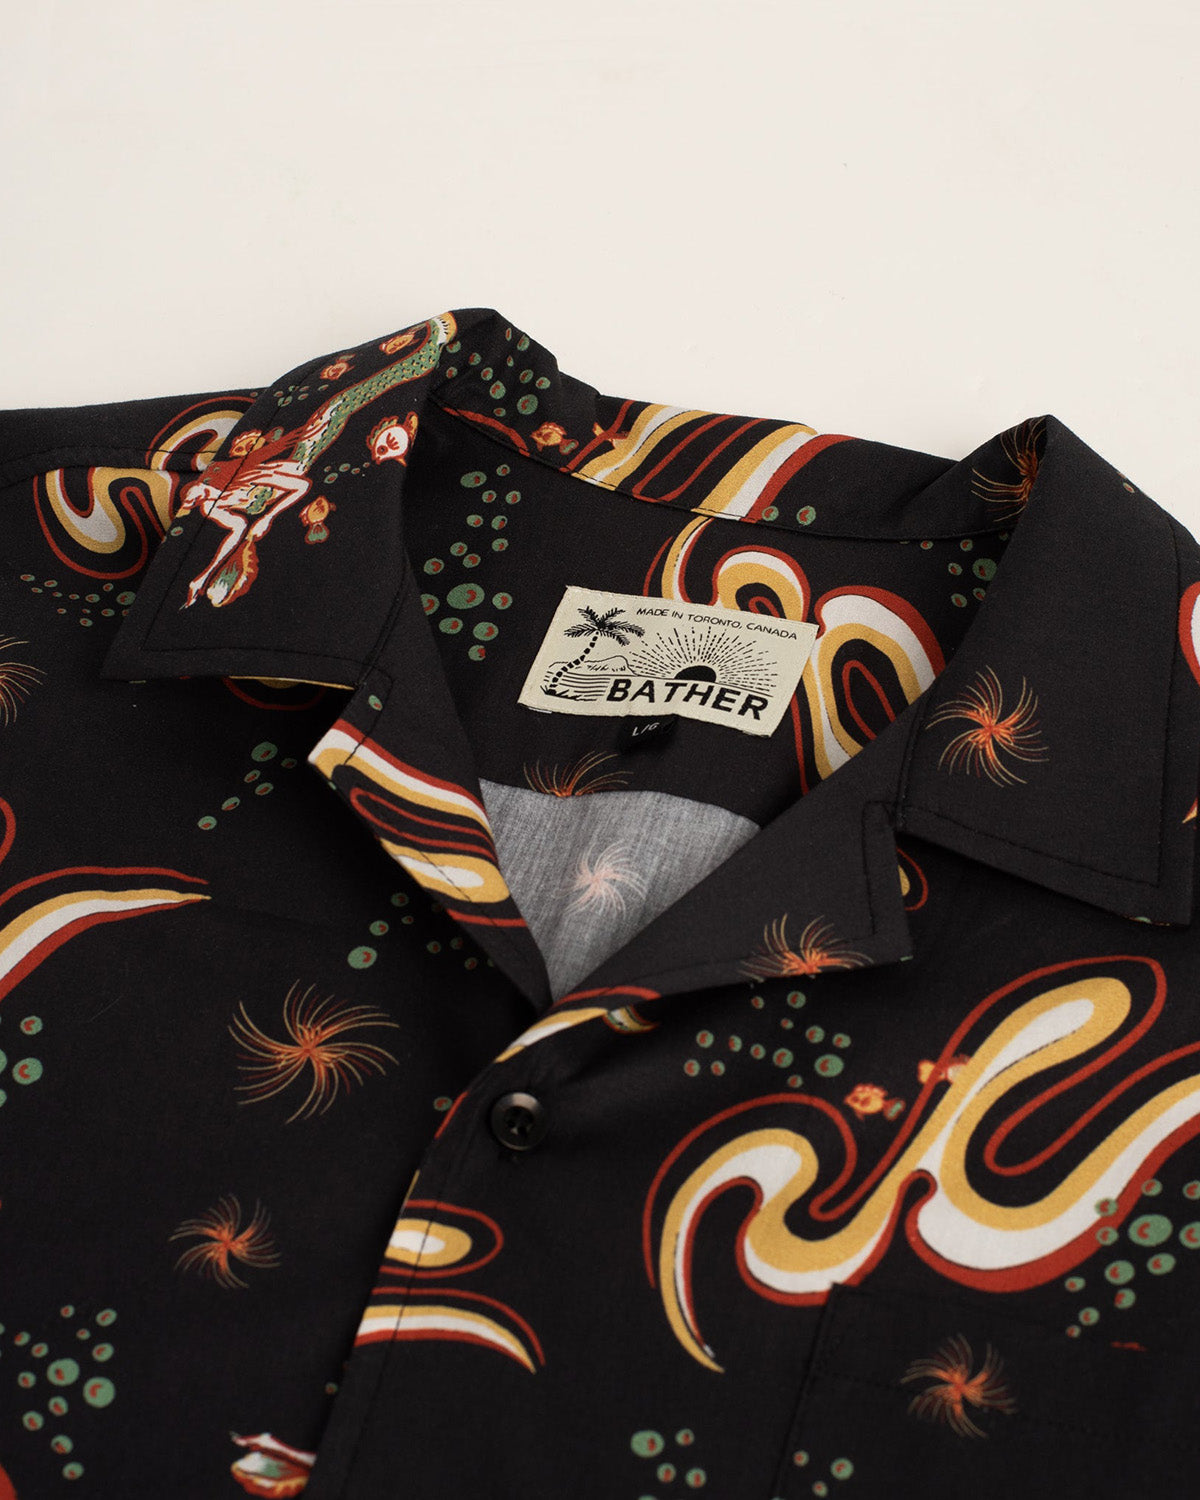 Close up of Black Bather camp shirt with siren pattern